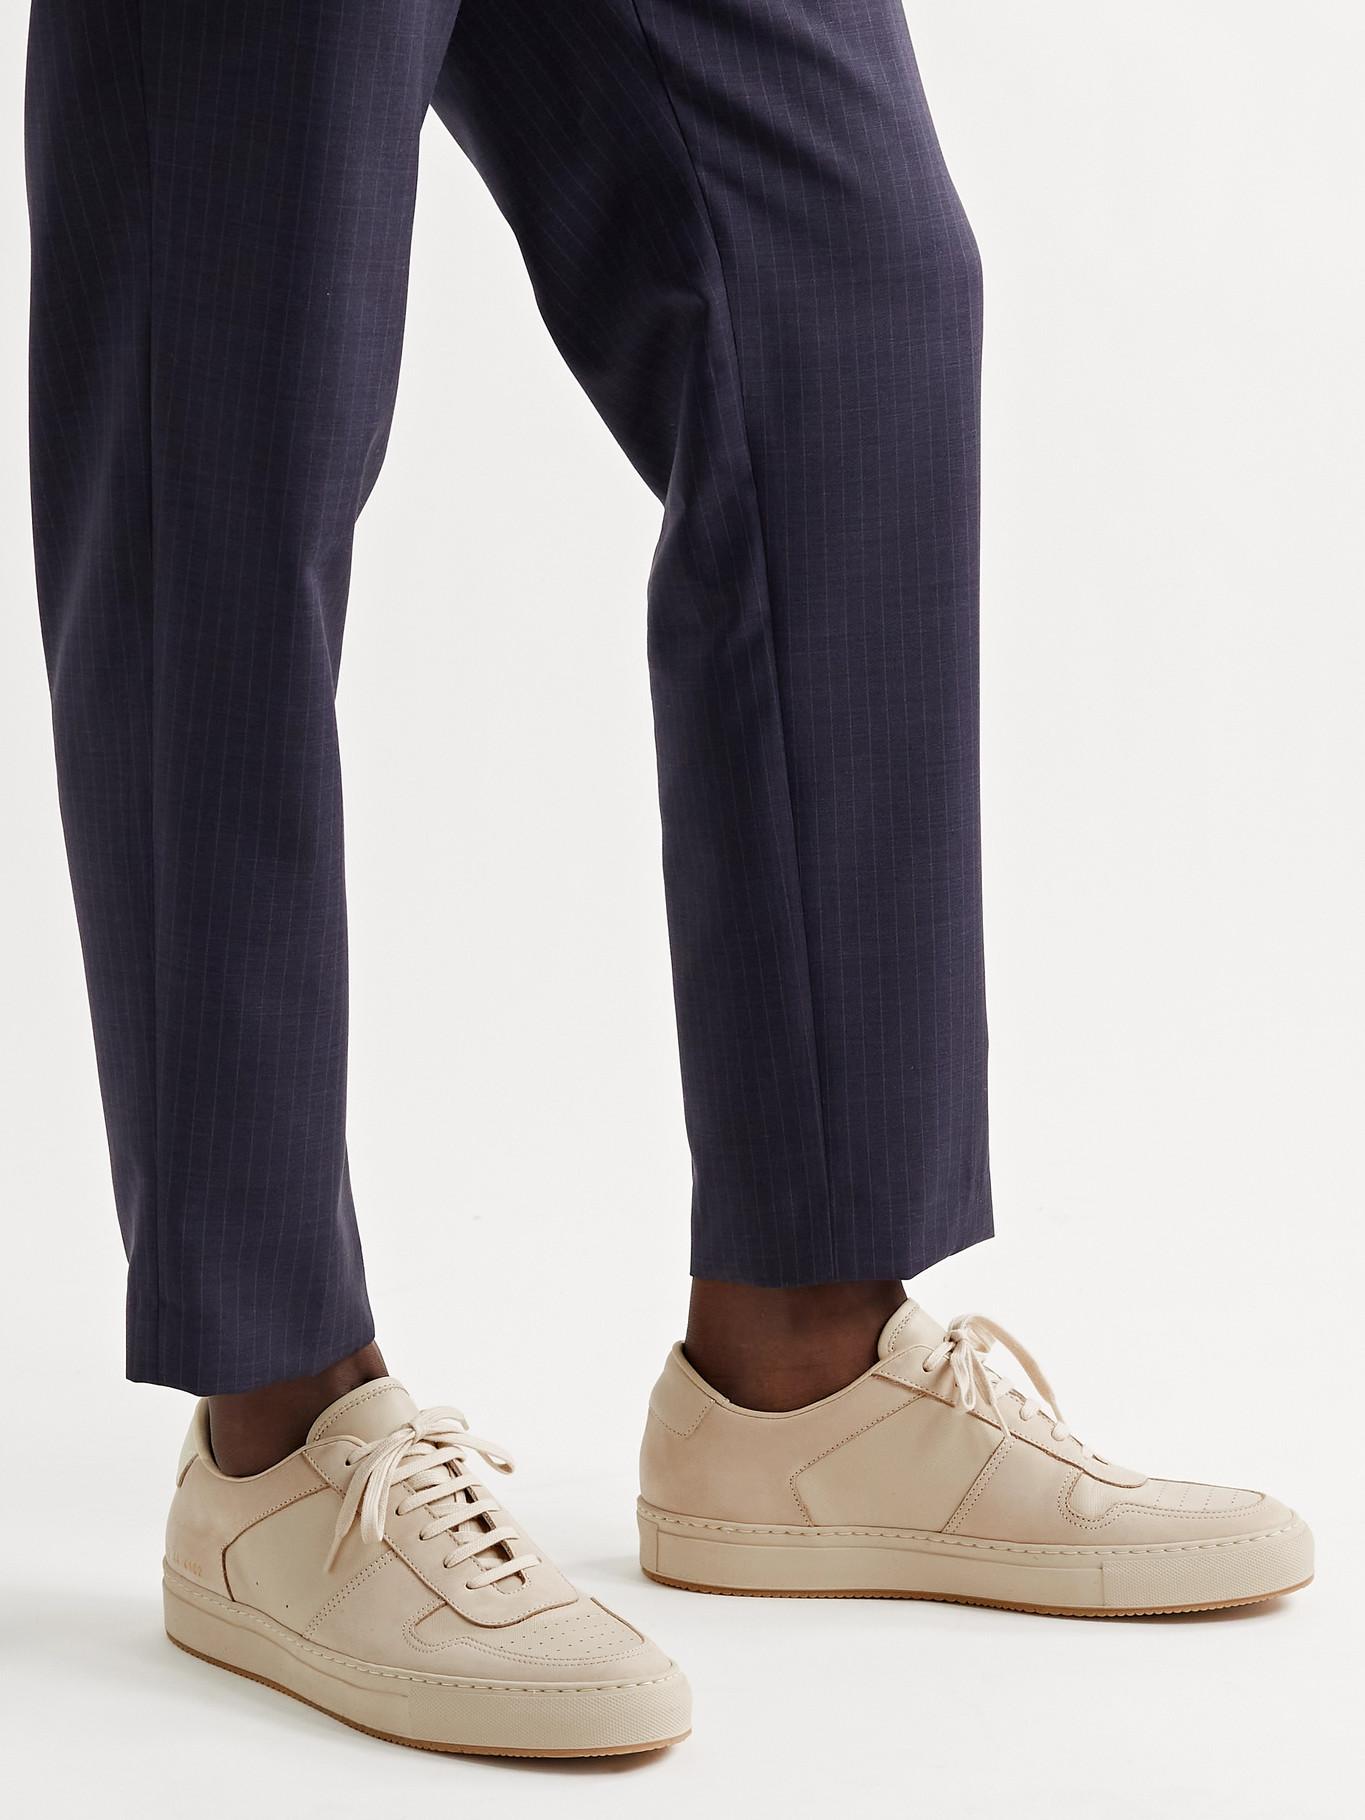 Common Projects Bball Saffiano Leather And Nubuck Sneakers for Men | Lyst  Canada